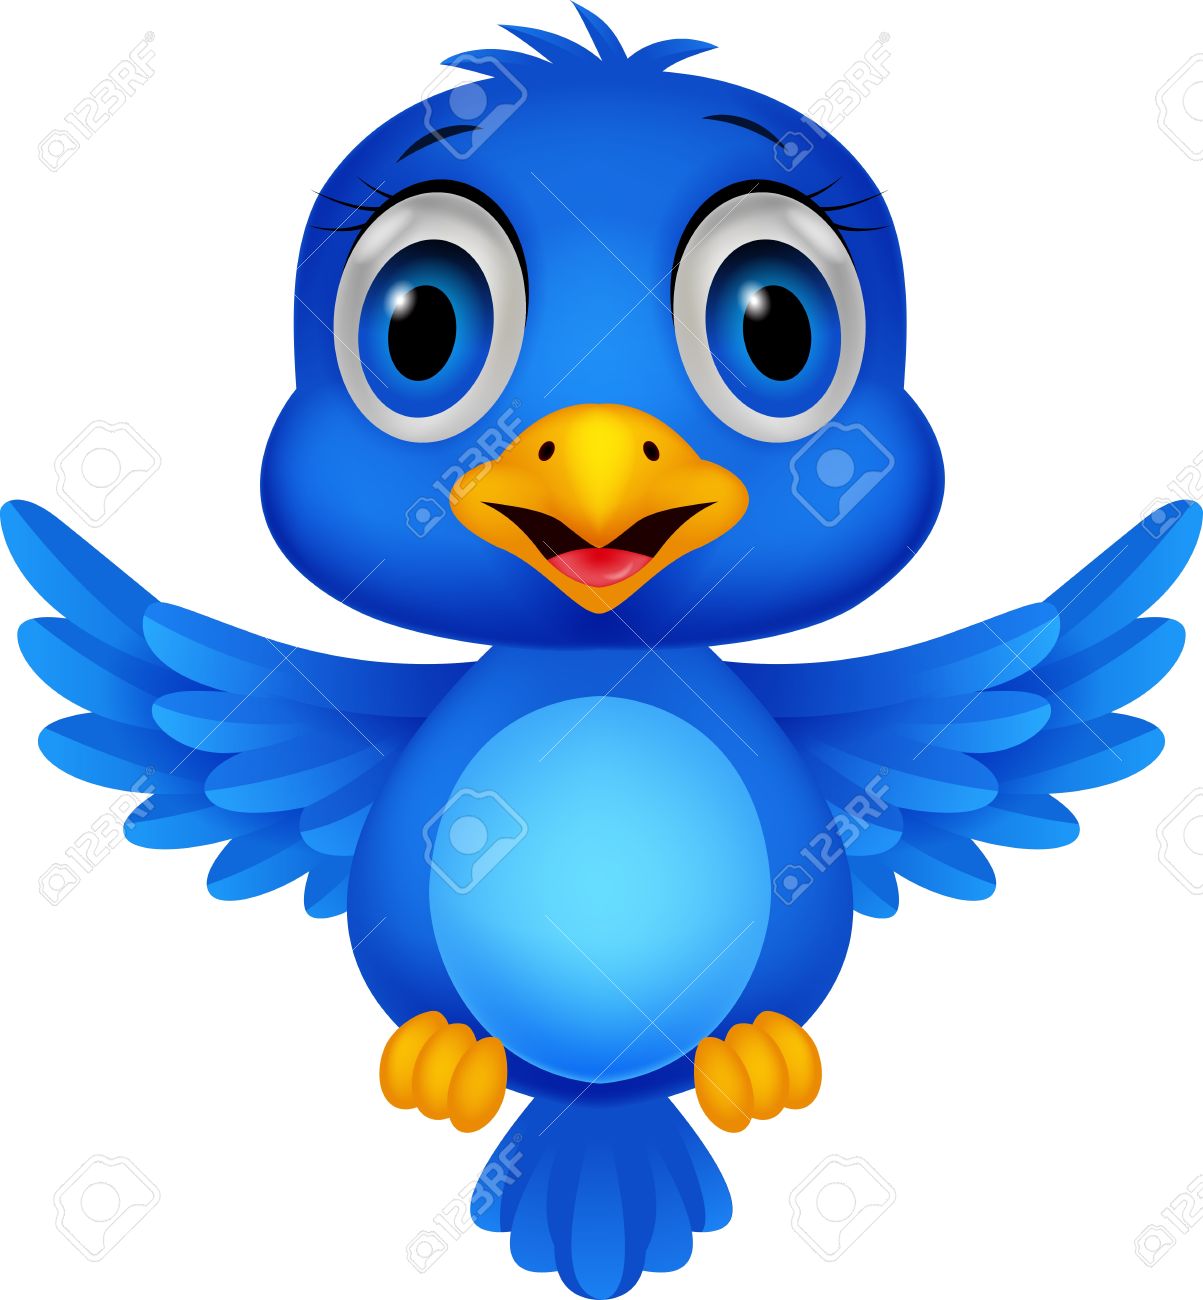 Collection of Bluebird clipart | Free download best Bluebird clipart on ...